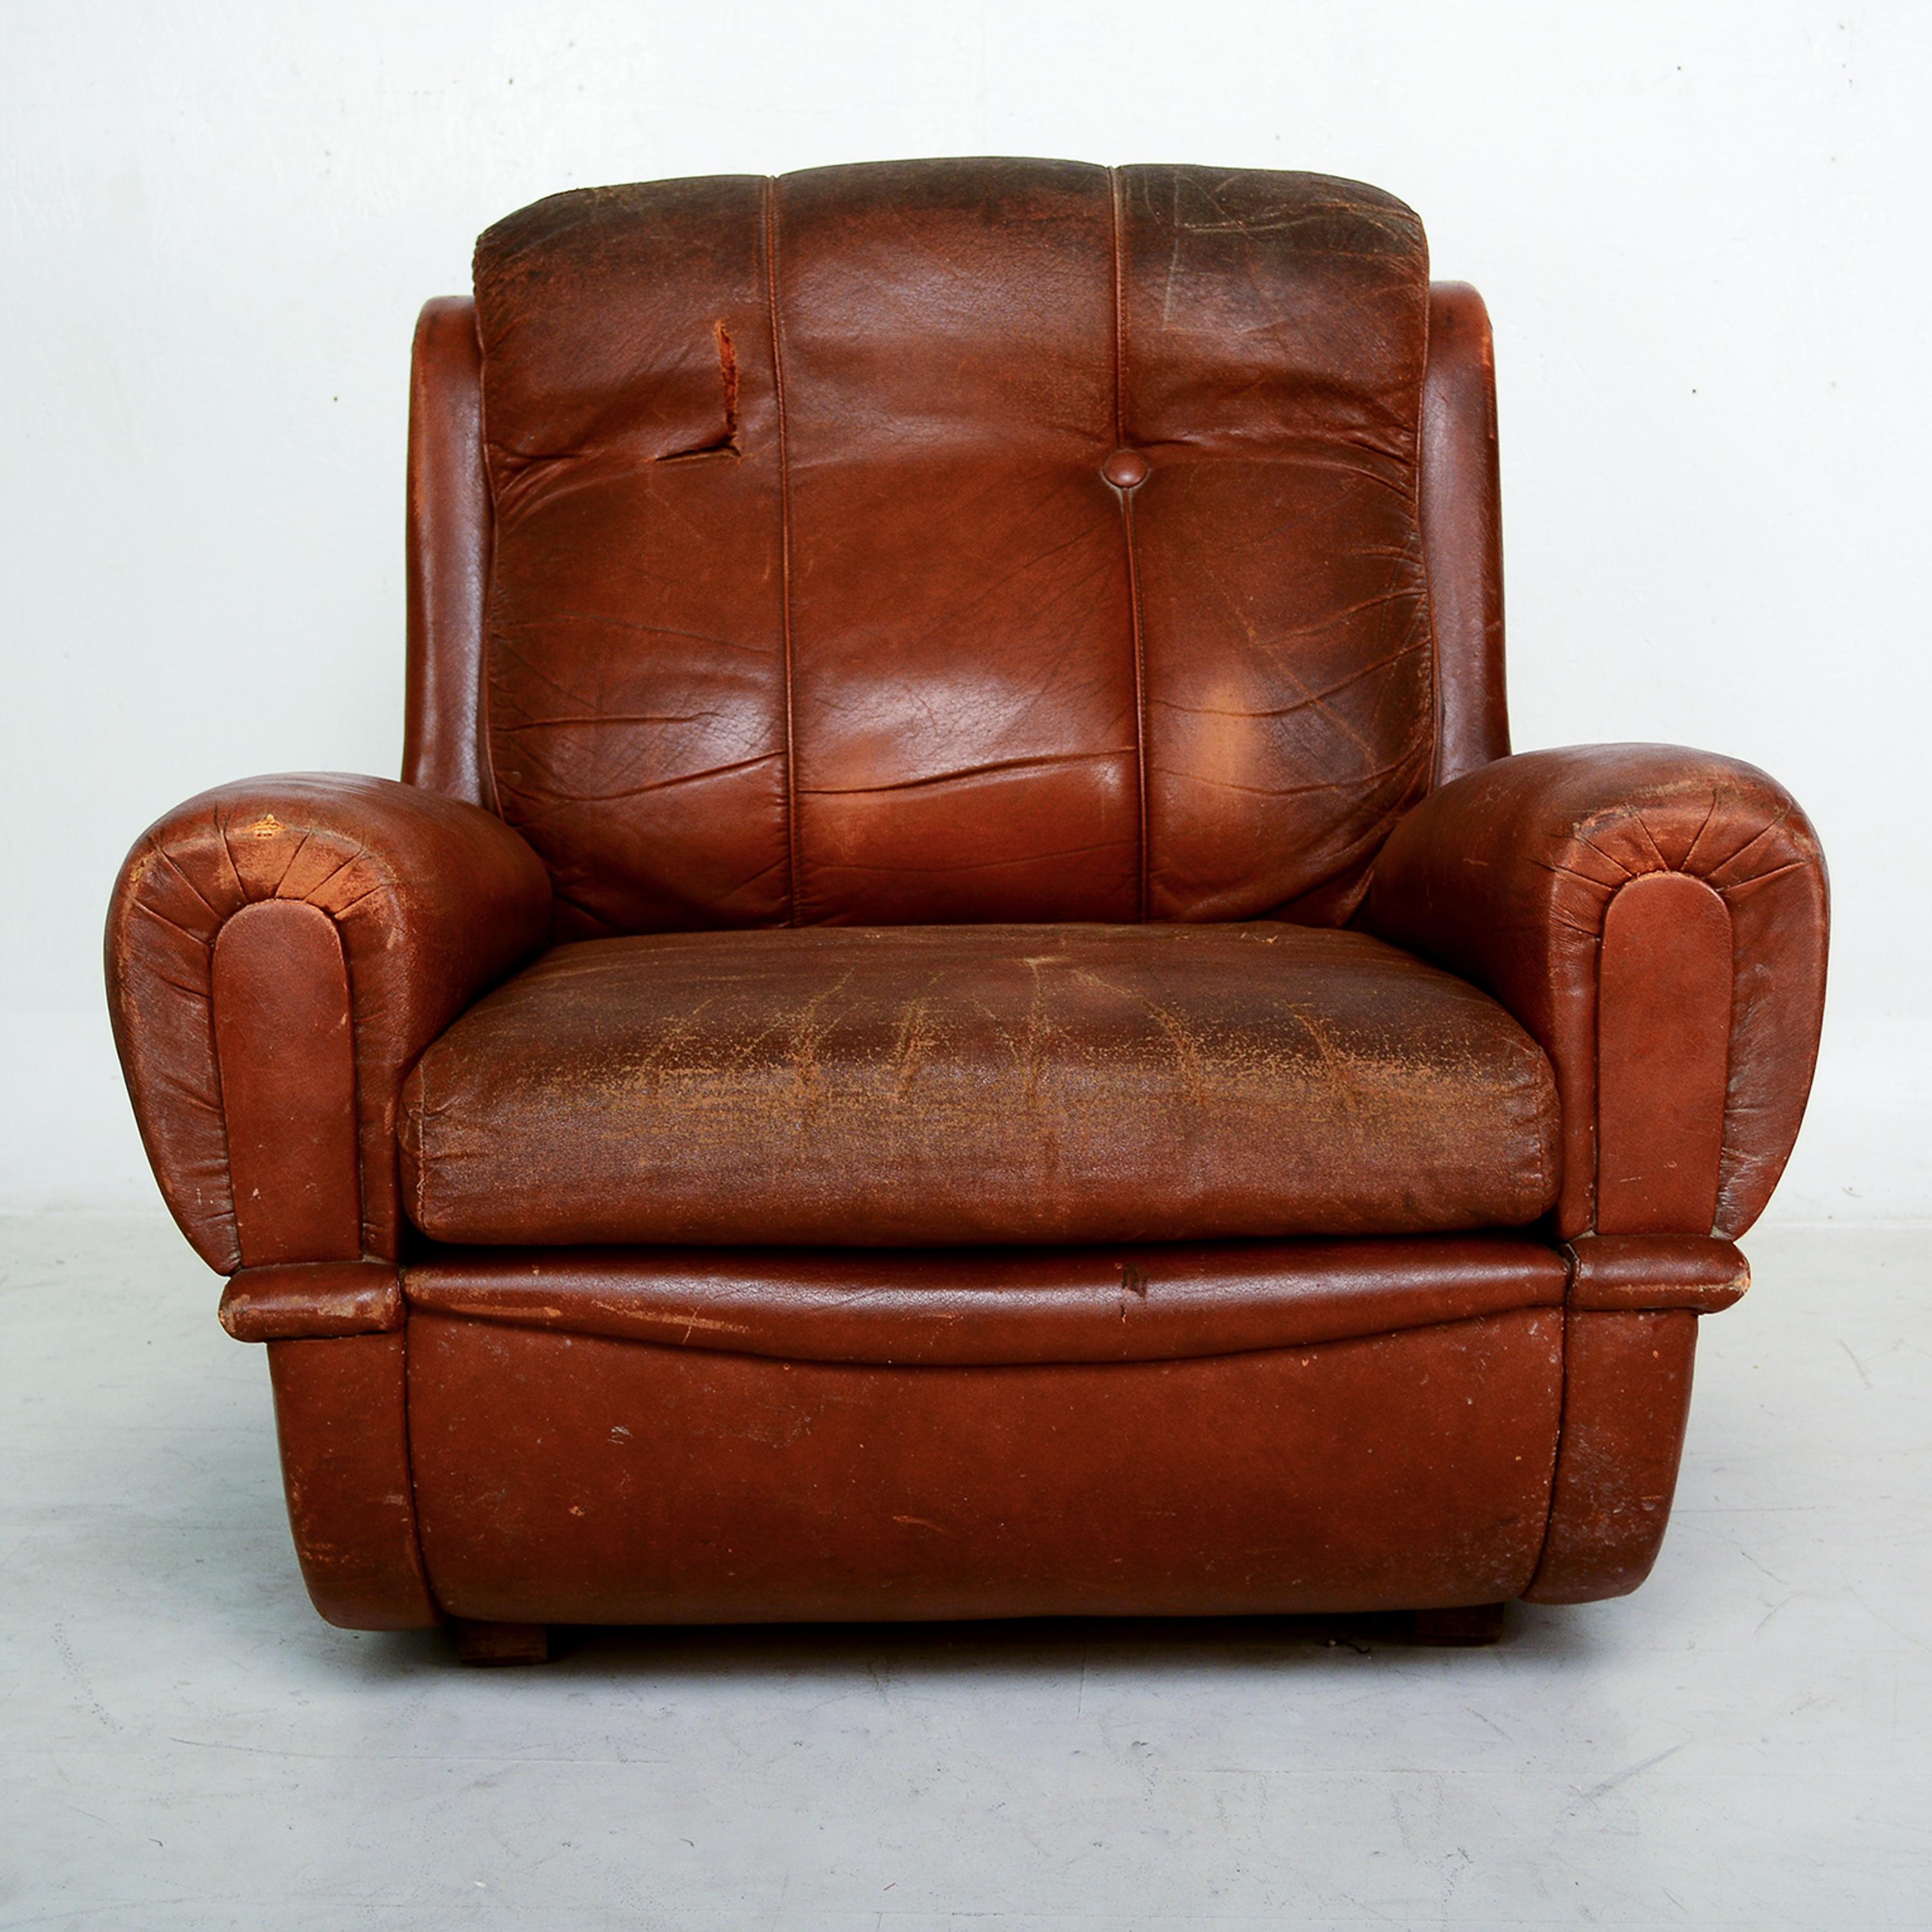 For your consideration: Guiseppe Munari for Poltrona Munari Italian pair of lounge chairs in tobacco leather 1960s Italy
Sensational style Italian arm chairs leather lounges club chairs- set of two.
Vintage Munari in tobacco leather with classic